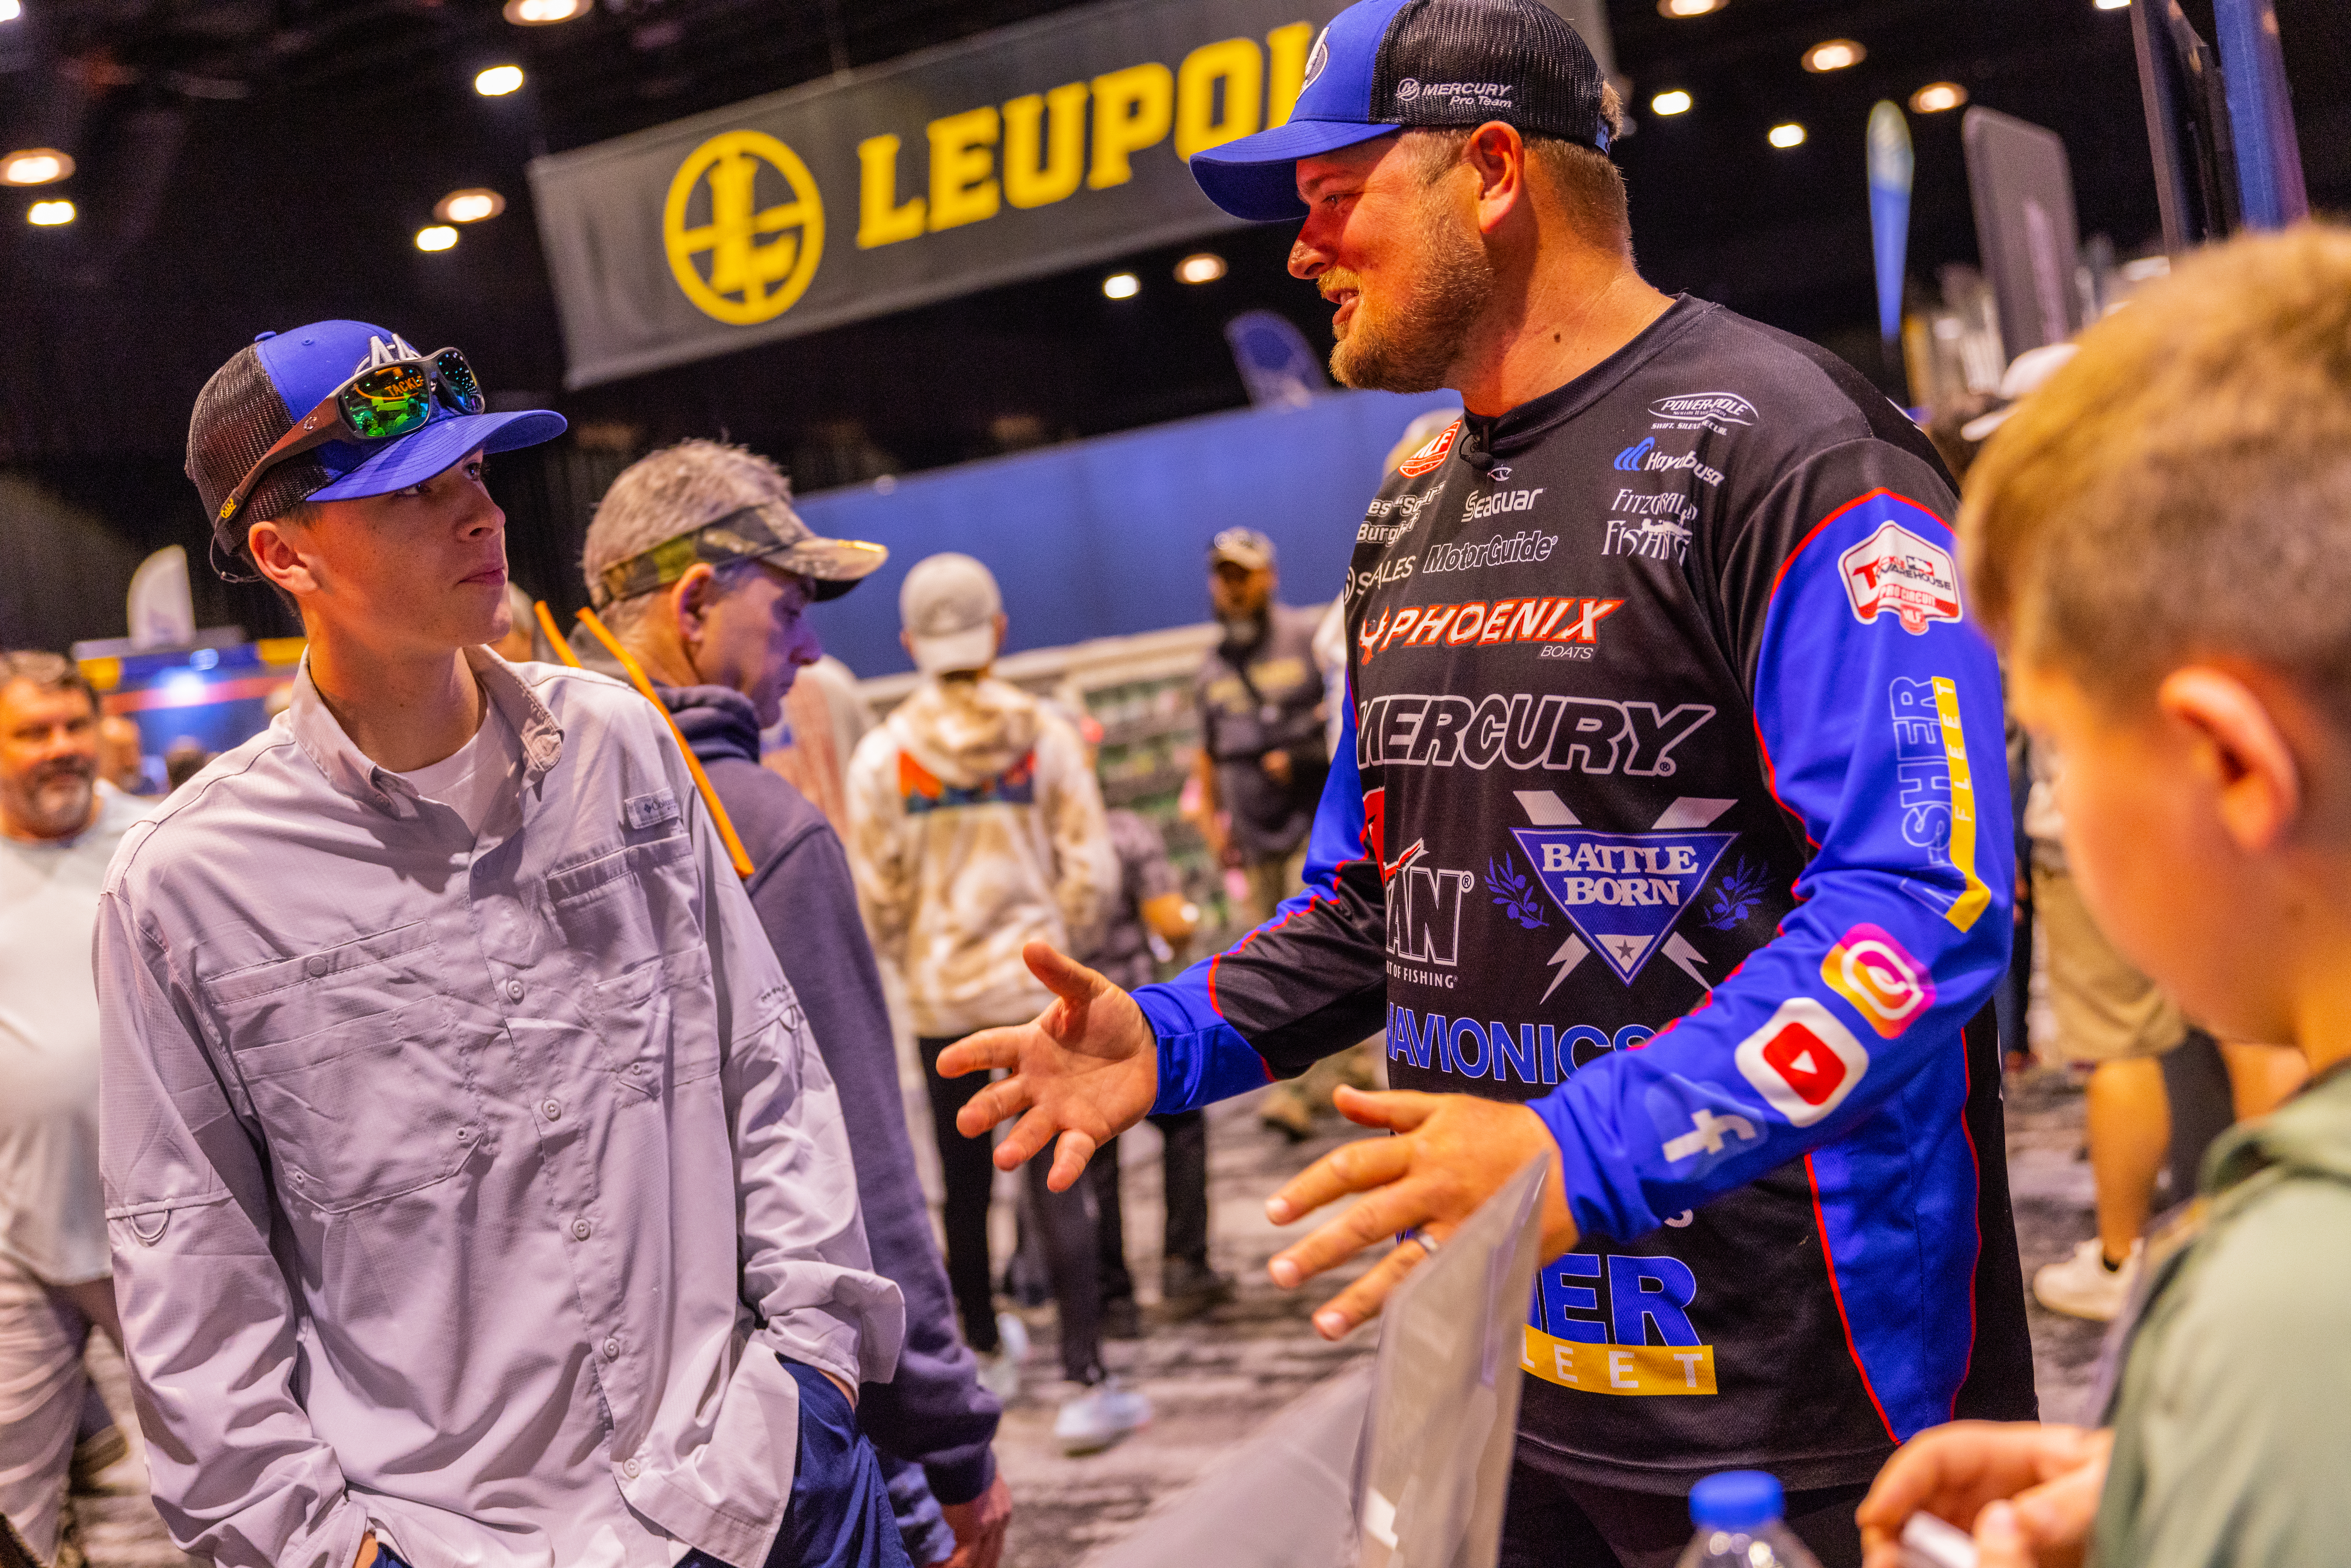 Professional Angler Miles Burghoff at the Battle Born Batteries Booth